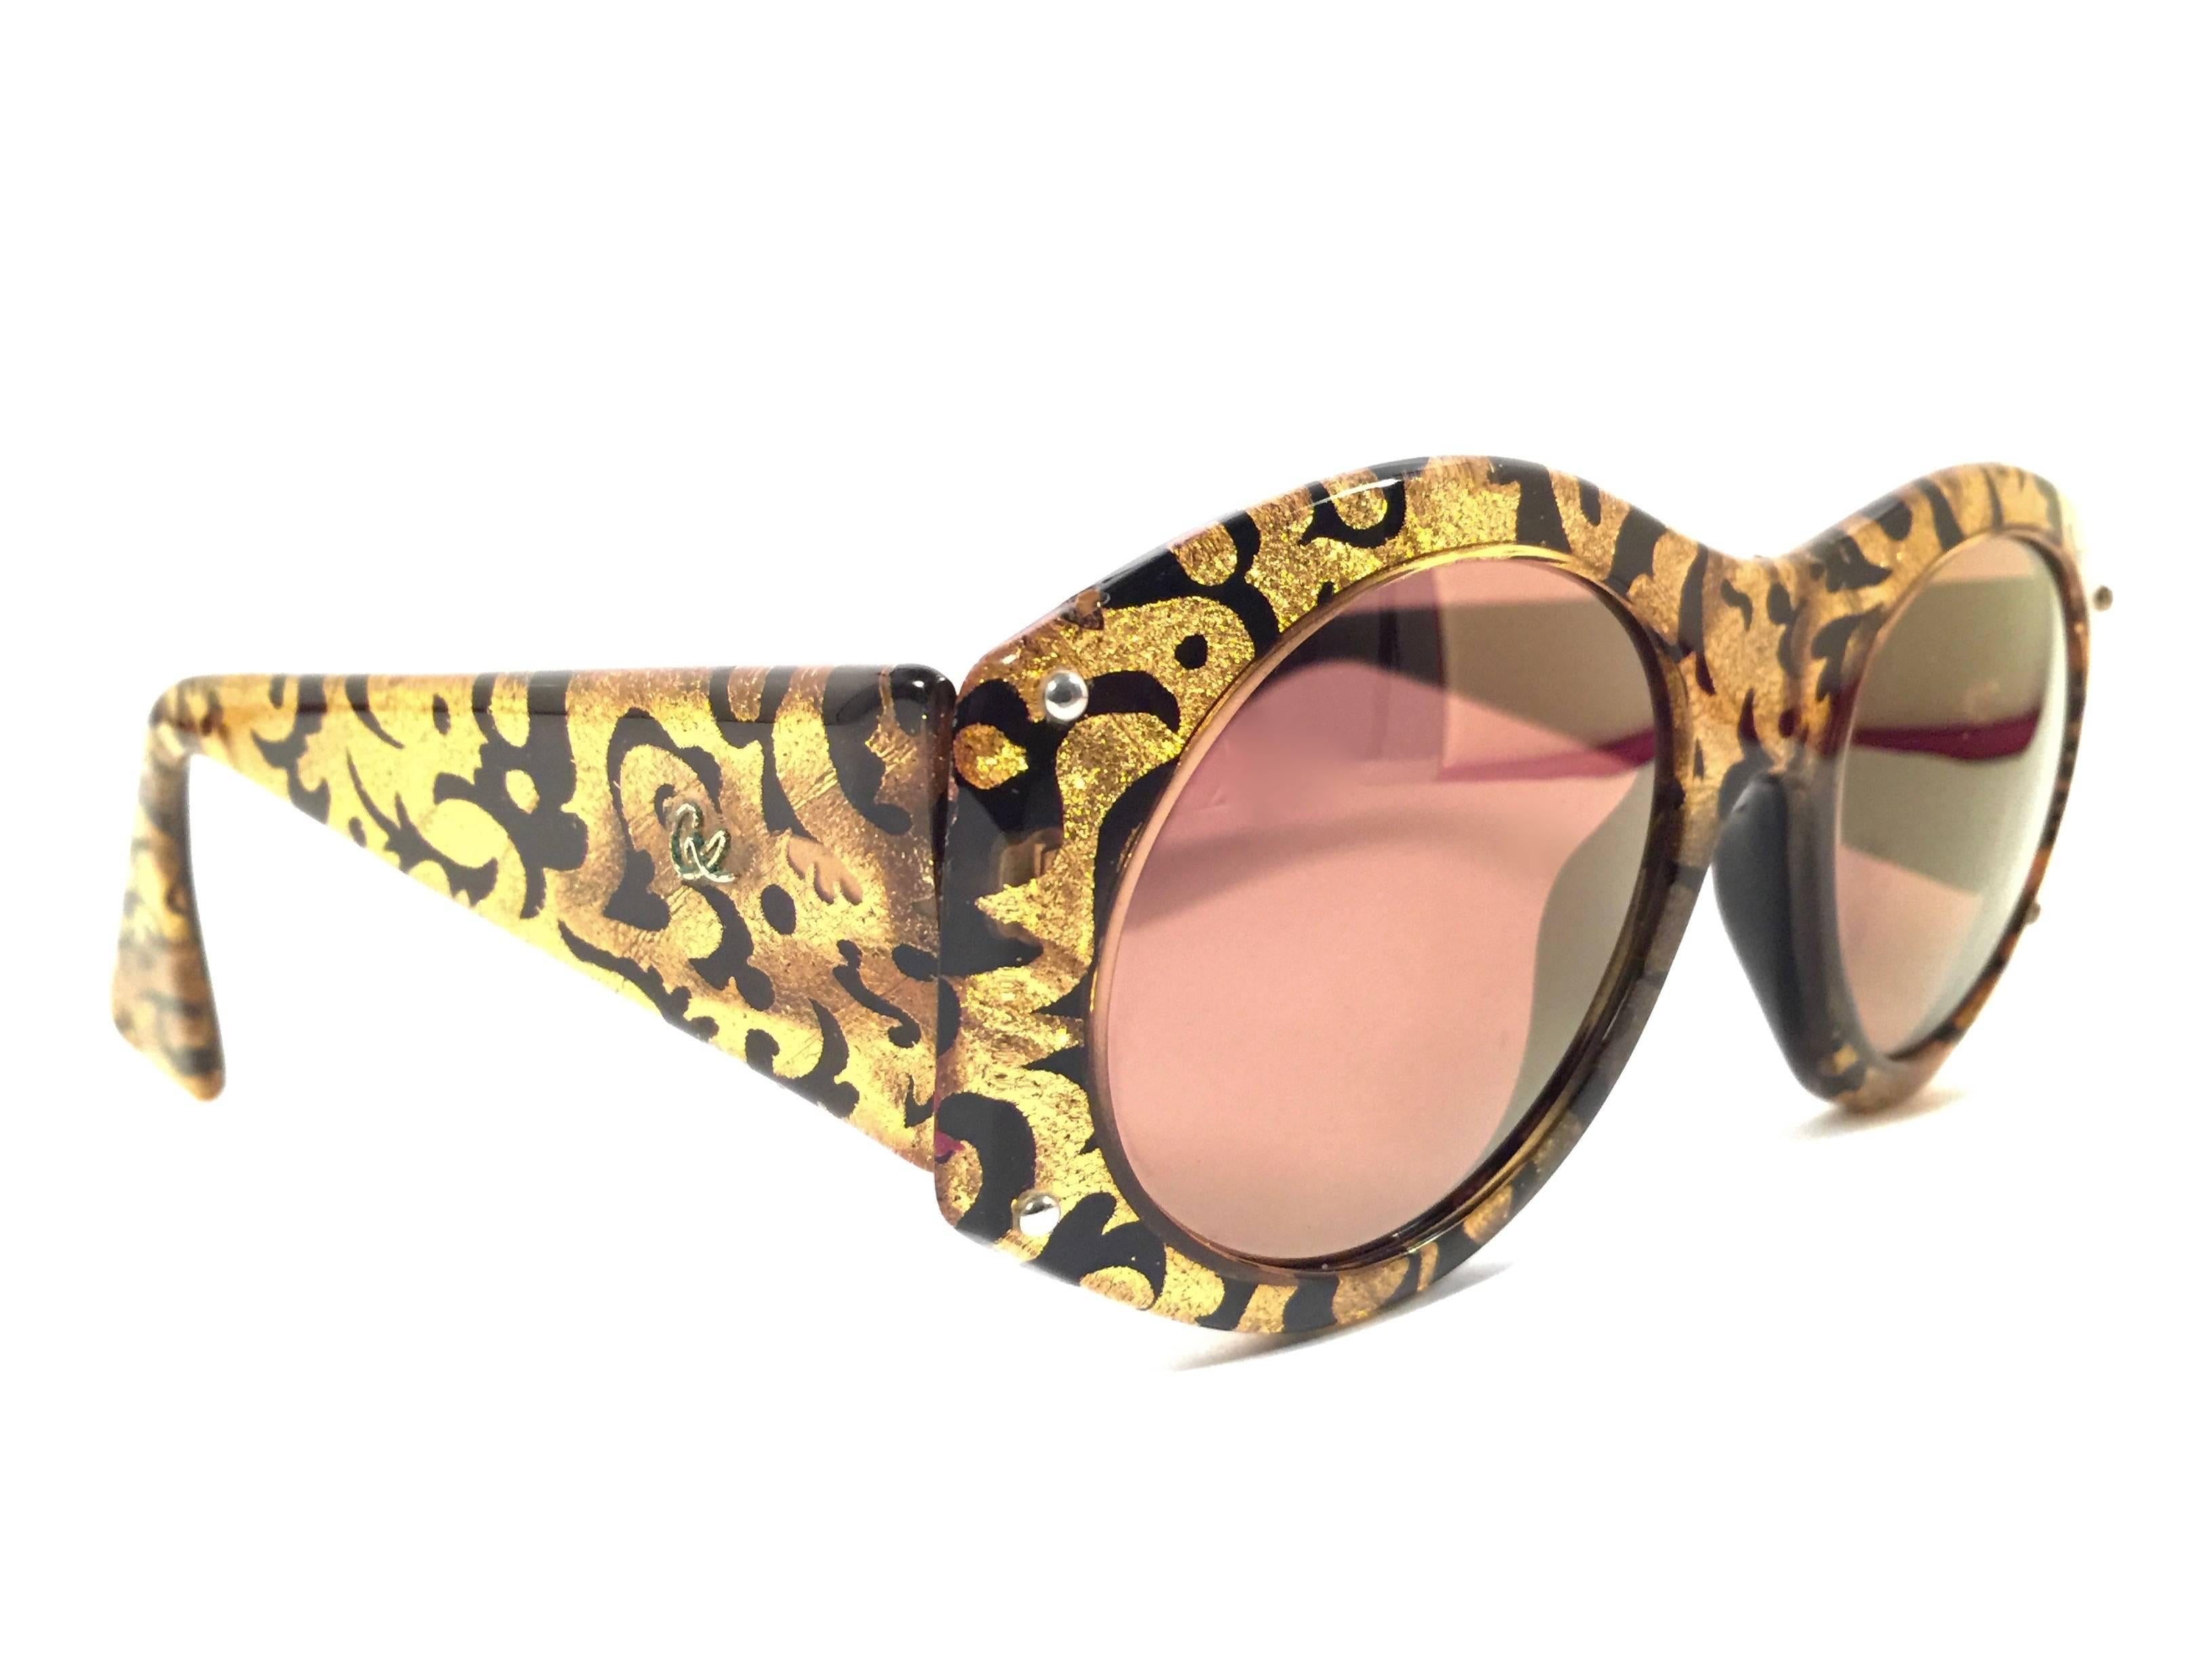 Rare pair of New vintage Christian Lacroix sunglasses.   

Black & gold baroque pattern frame holding a pair of spotless amber mirror lenses. The interior logo has fade due to storage.

New, never worn or displayed. 

Made in France.

FRONT : 14.5